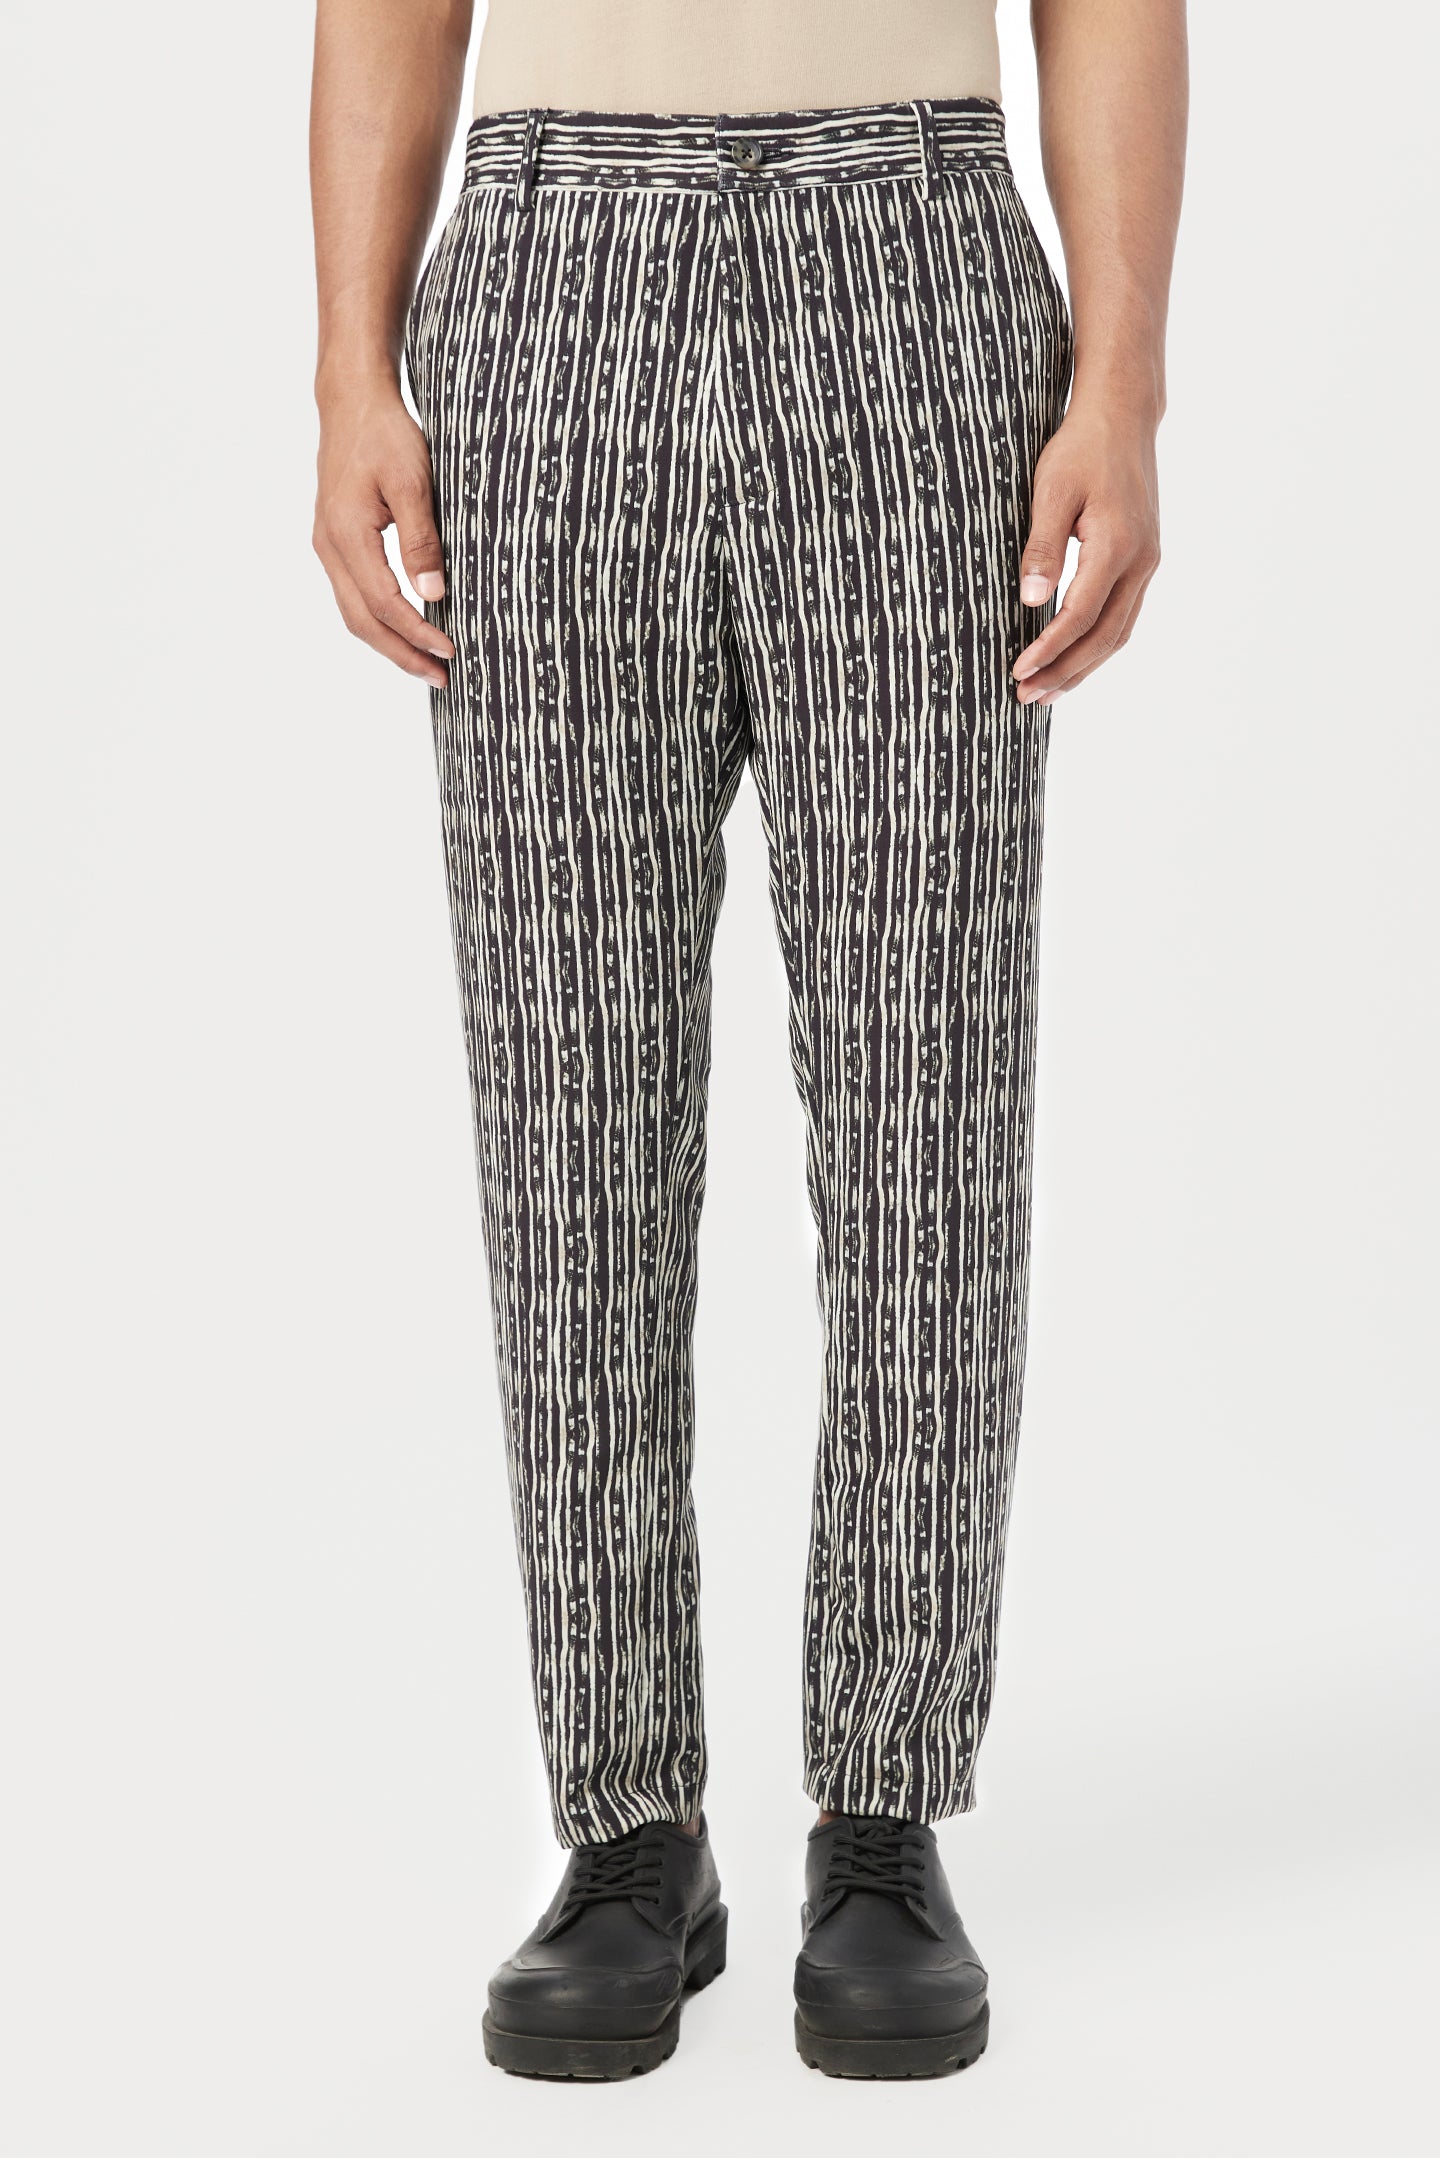 Classic Fit Trousers with All-Over Thin Textured Stripes Print